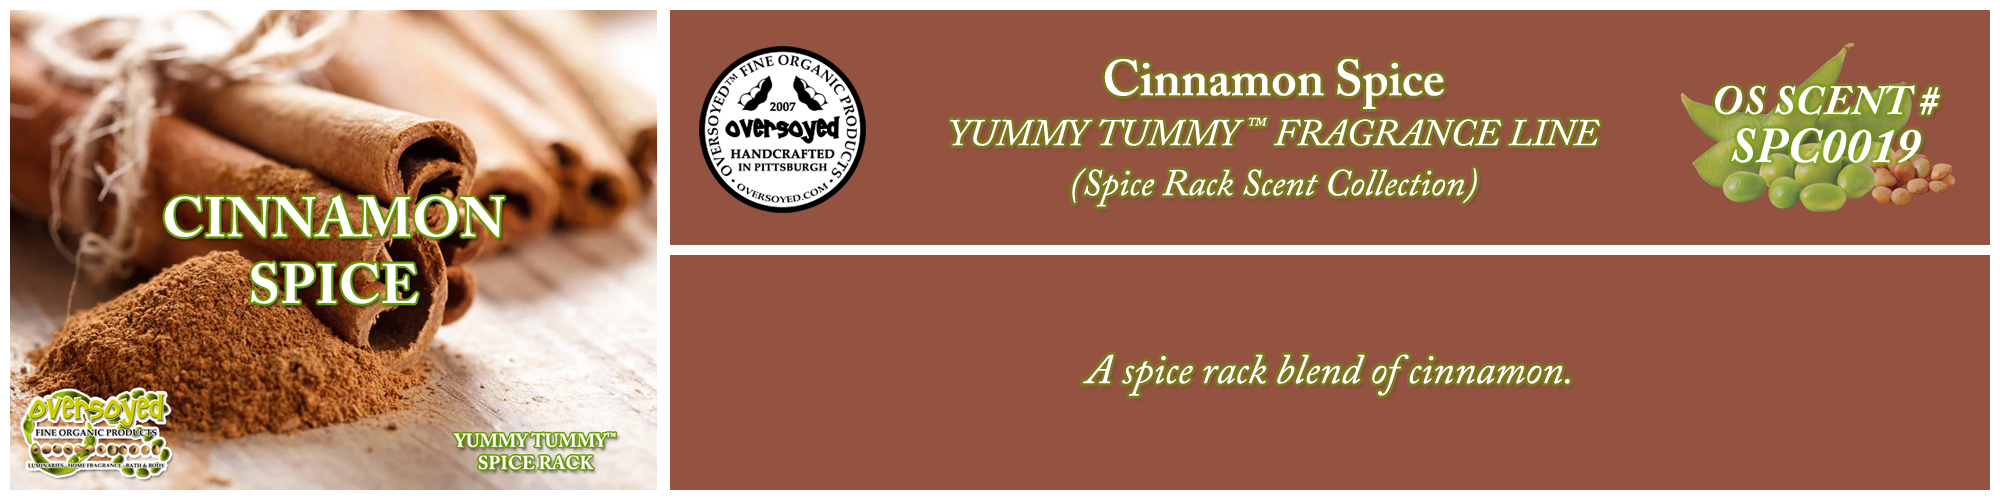 Cinnamon Spice Handcrafted Products Collection